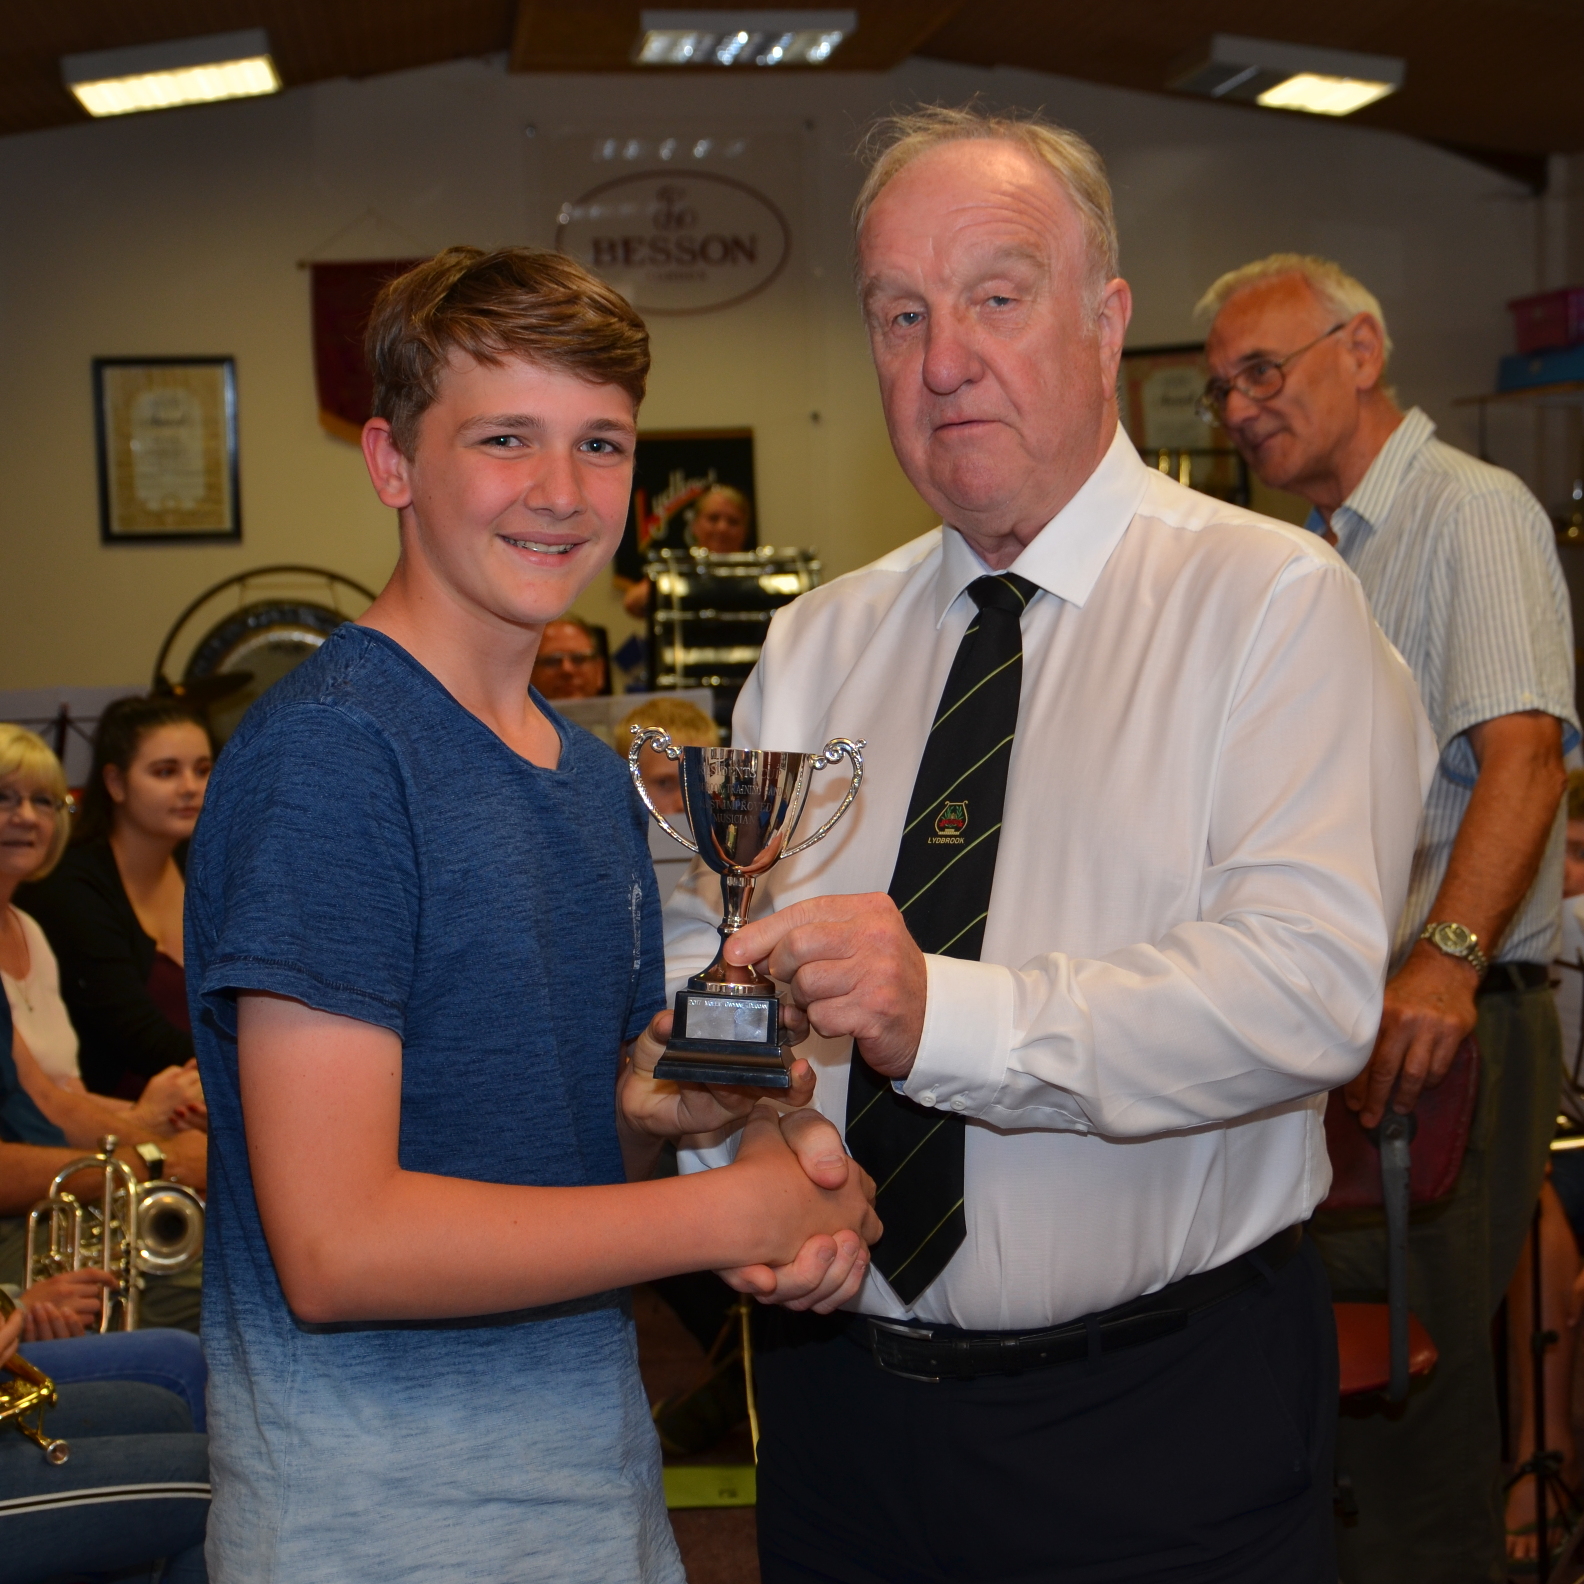 Peter presented the Presidents cup for the most improved musician to 14 year old percussion player Will Hamilton.